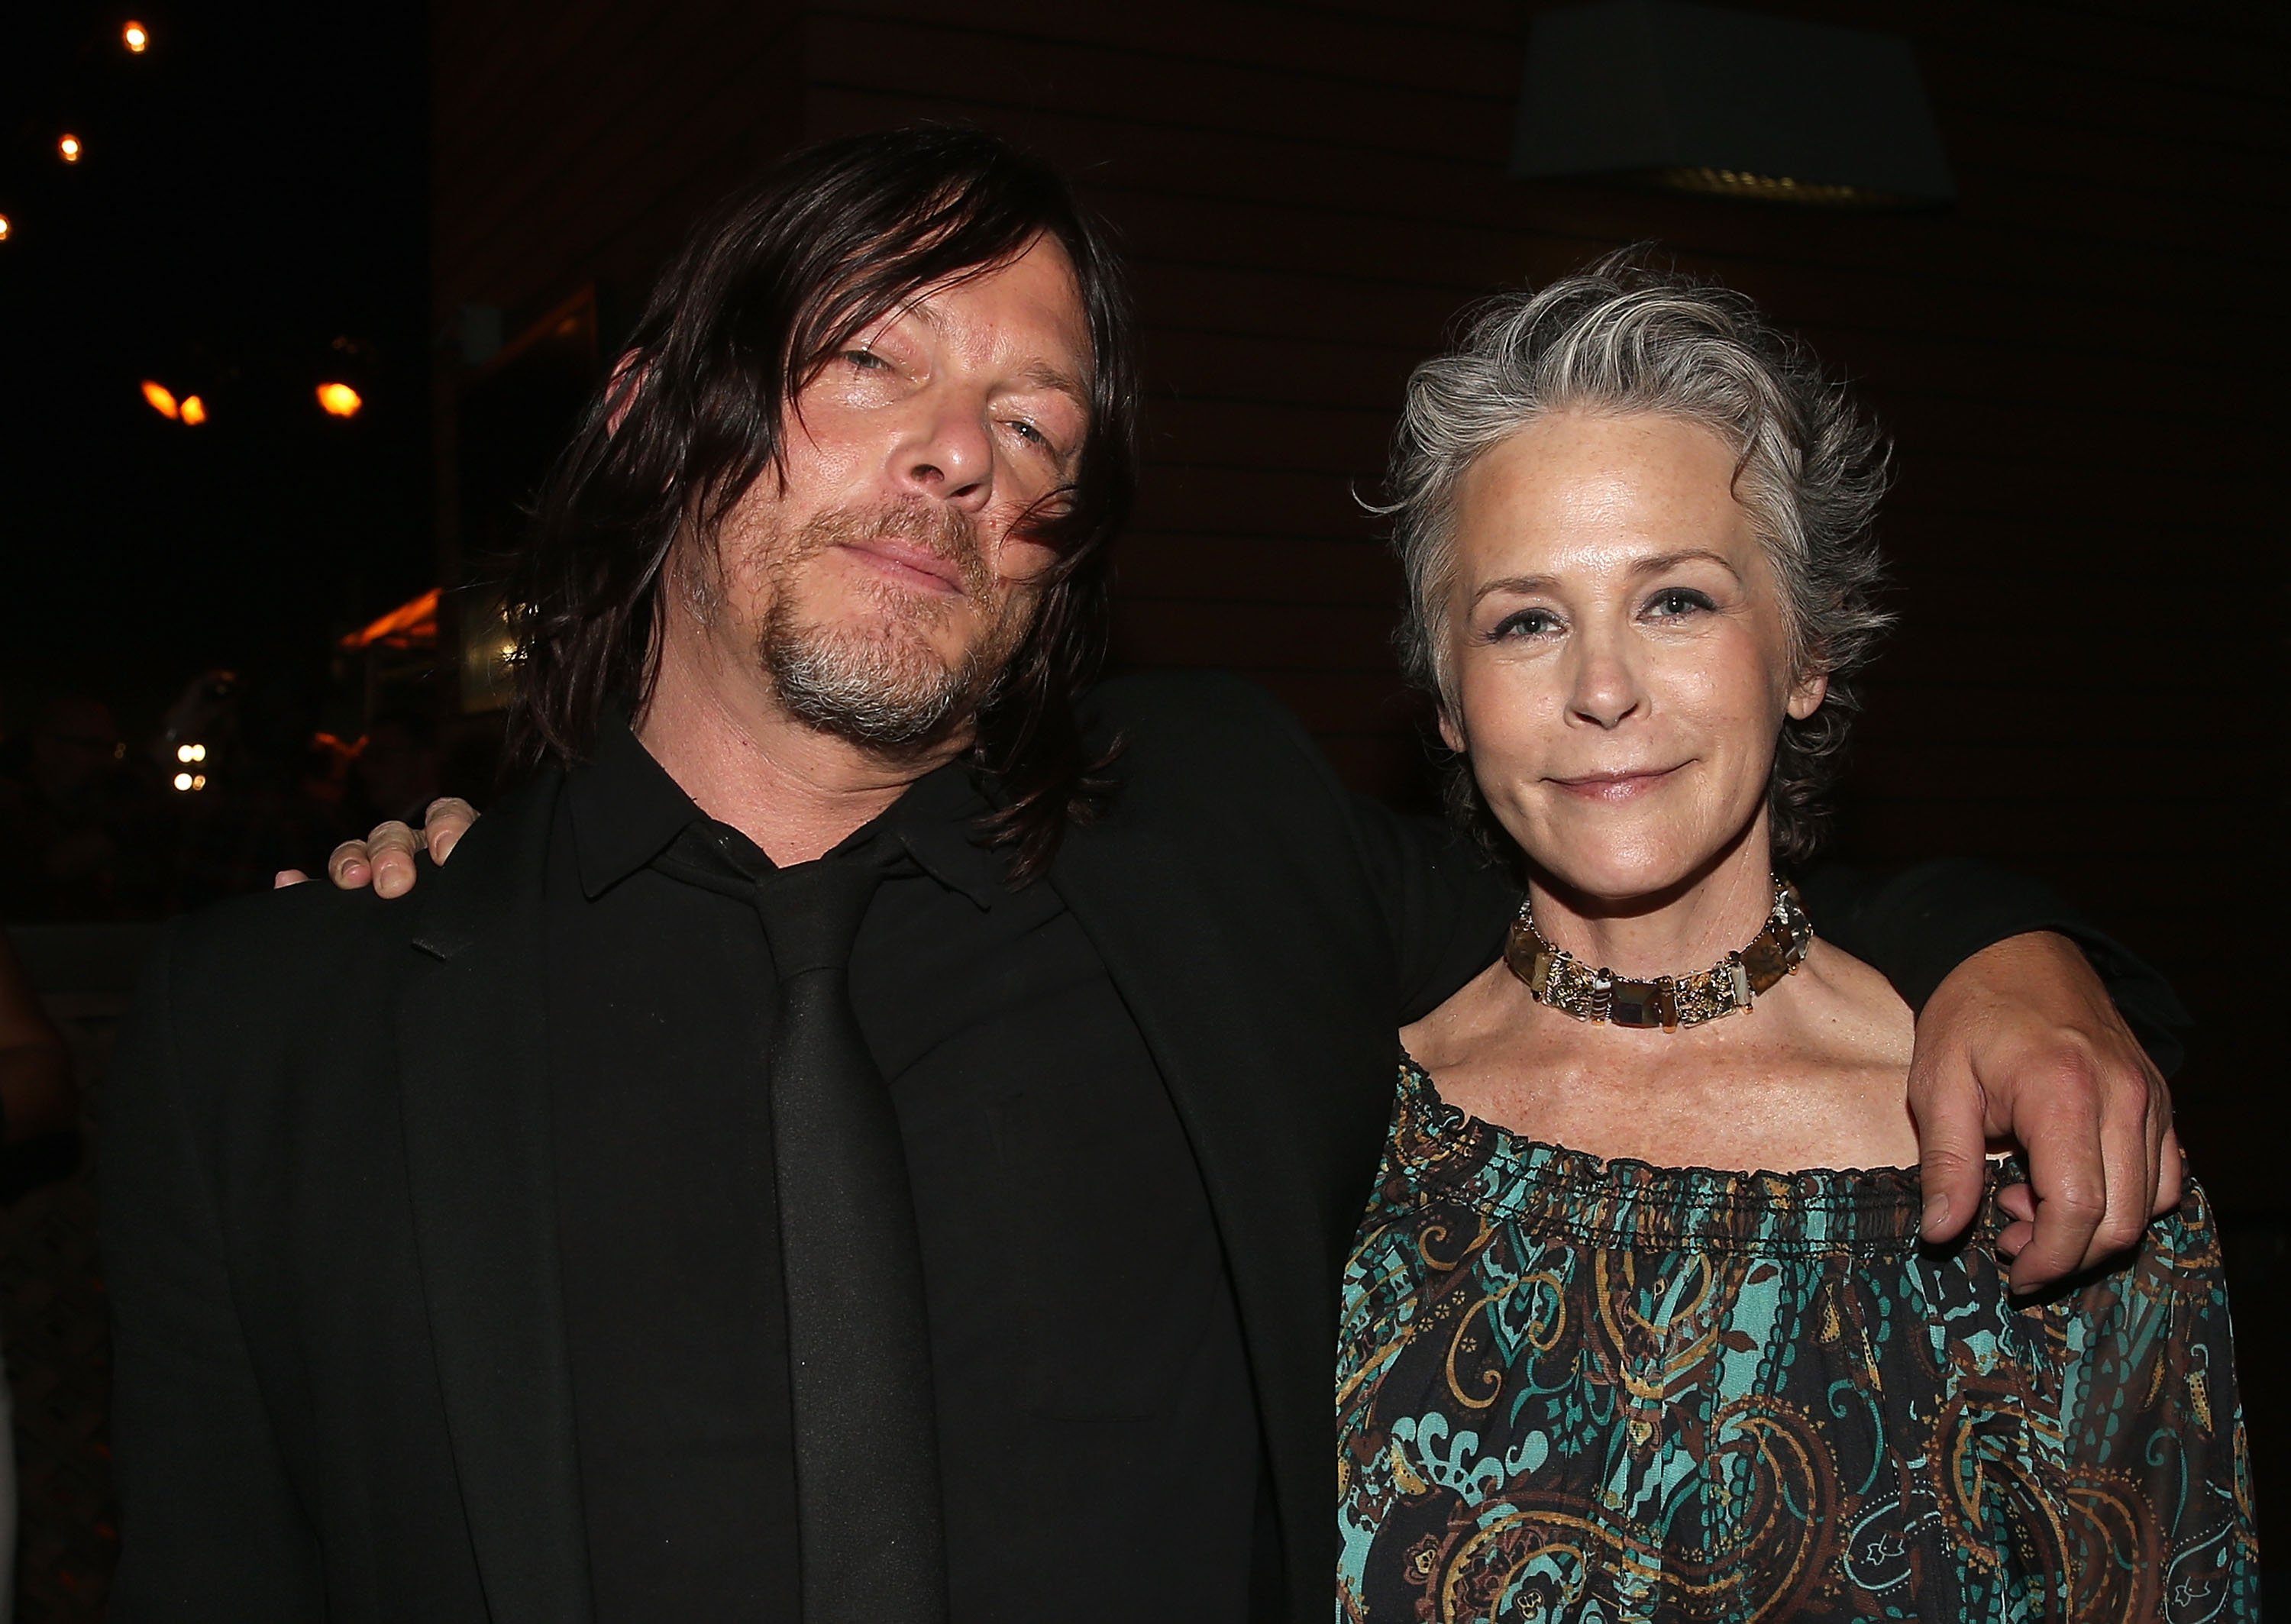 What is the Net Worth of The Walking Dead Daryl and Carol Spinoff Stars, Norman Reedus and Melissa McBride?